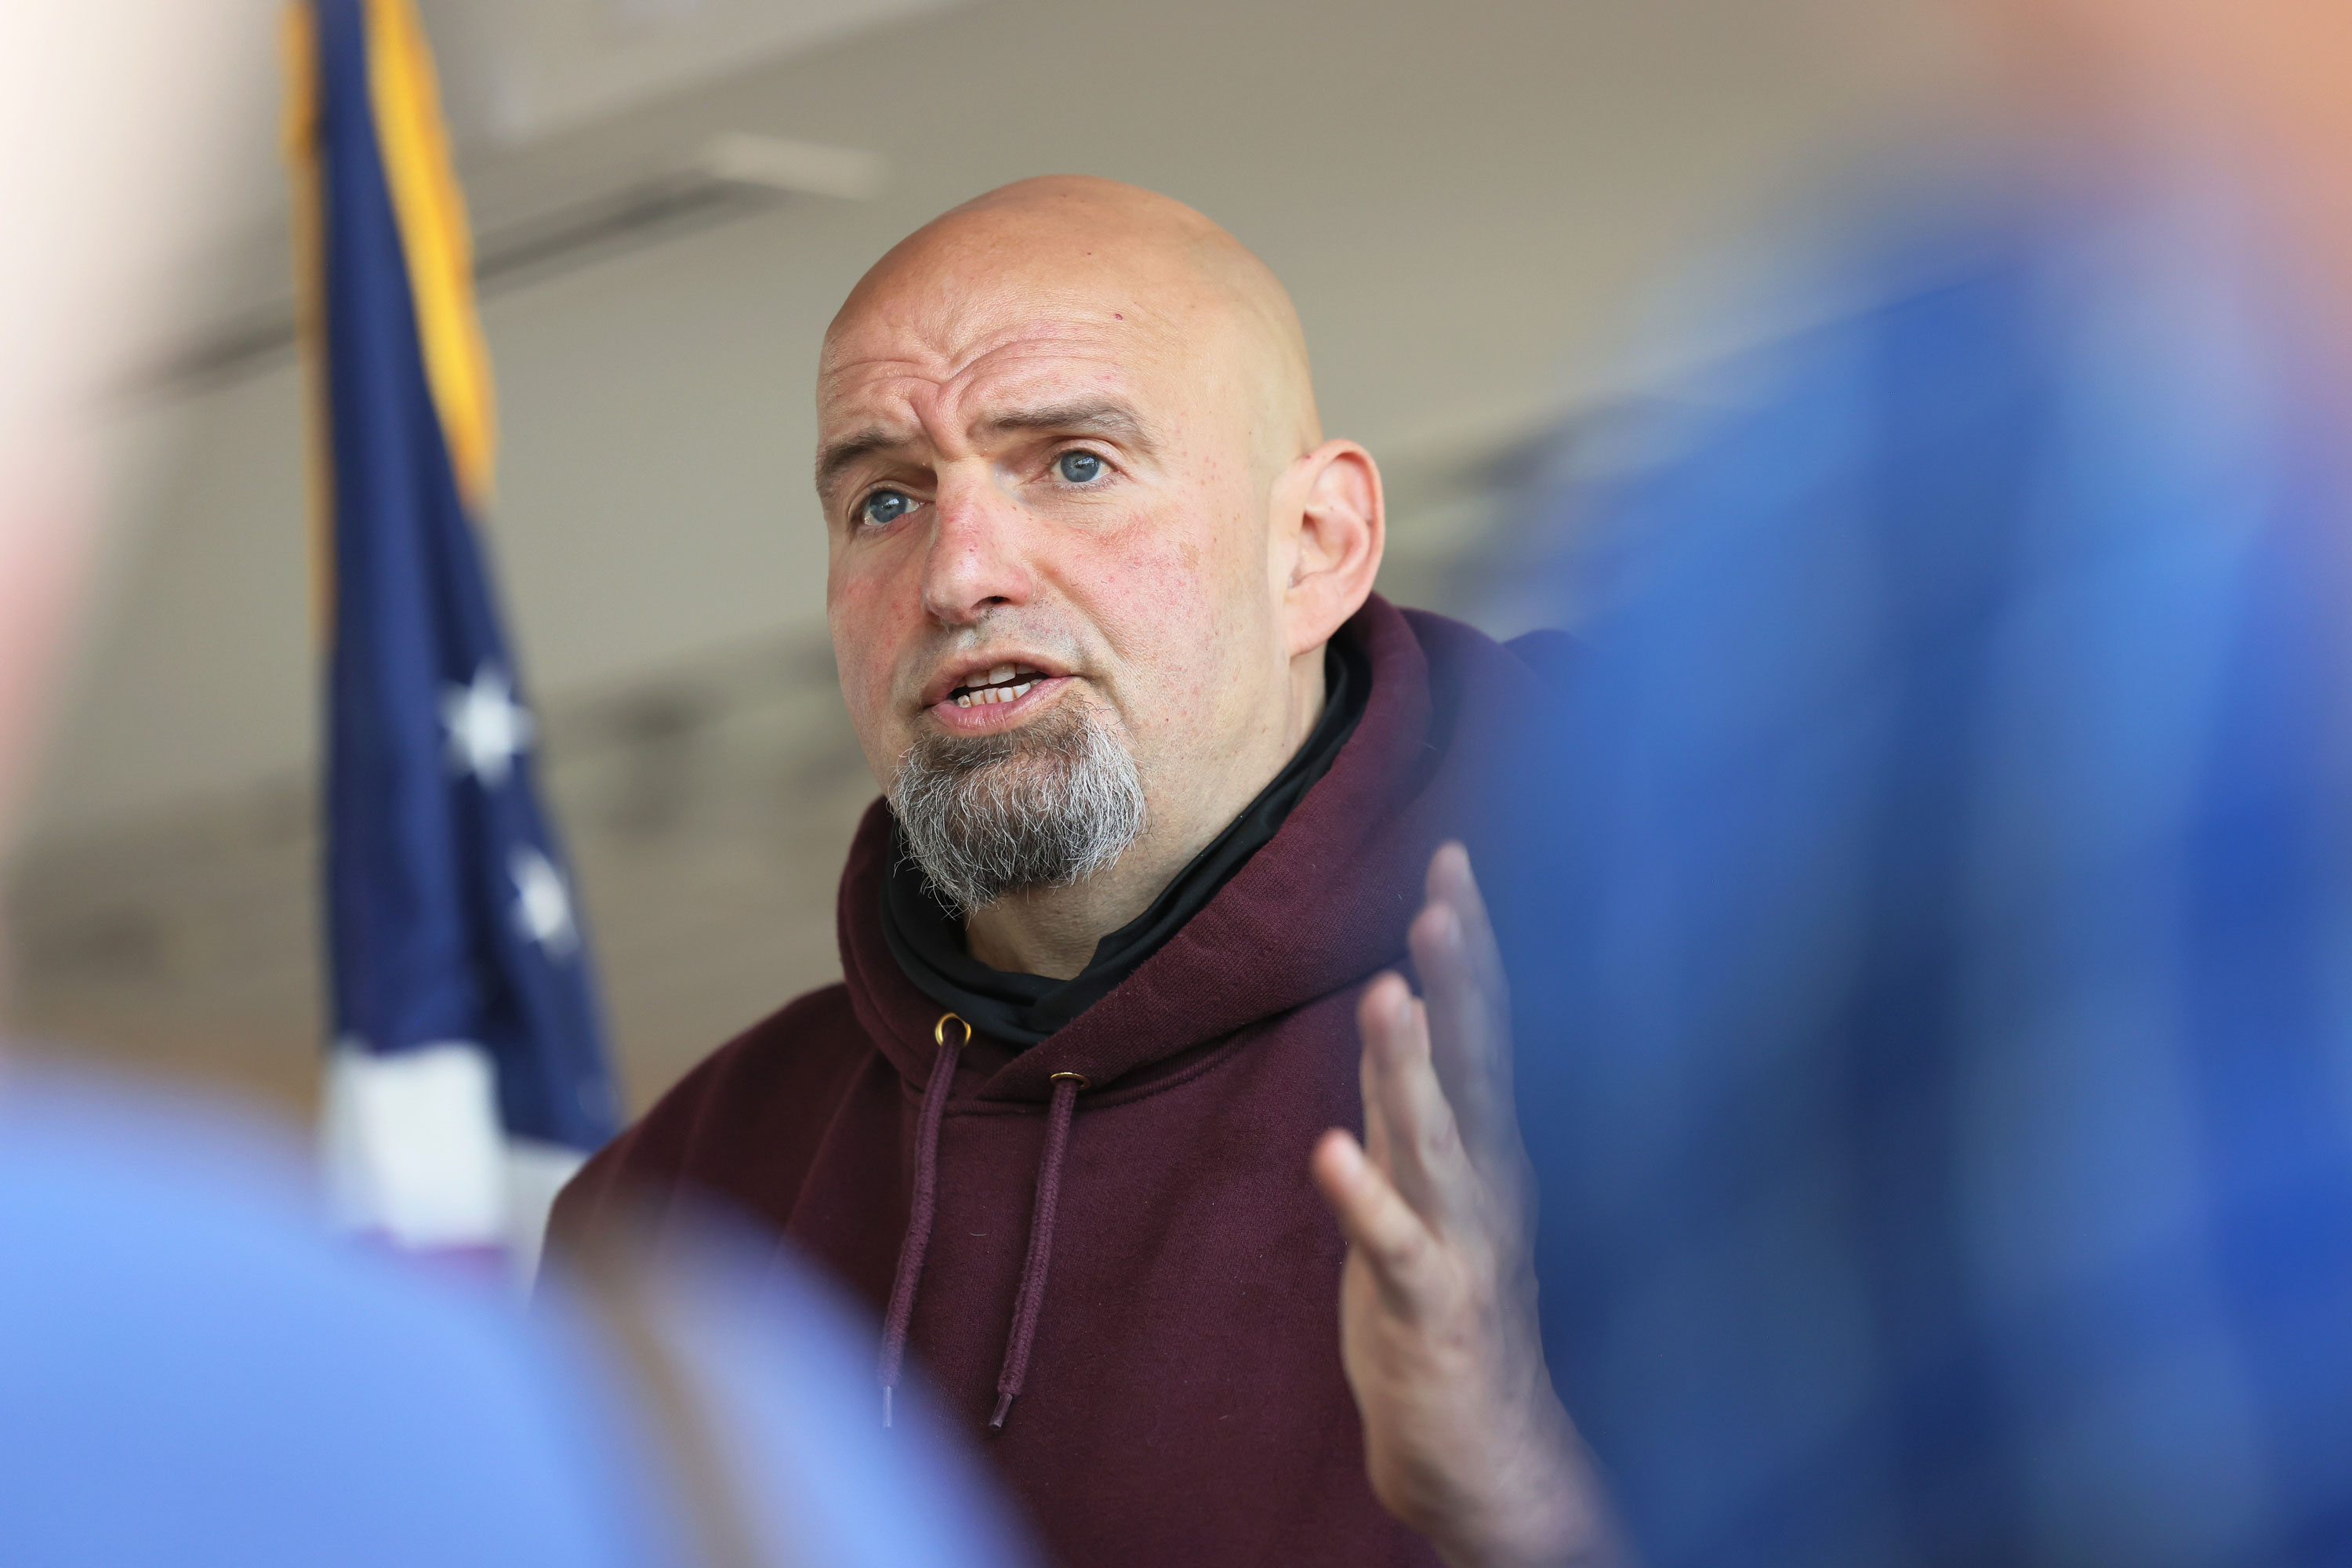 Pennsylvania US Senate candidate Fetterman suffers stroke but says he’s ‘well on my way to a full recovery’